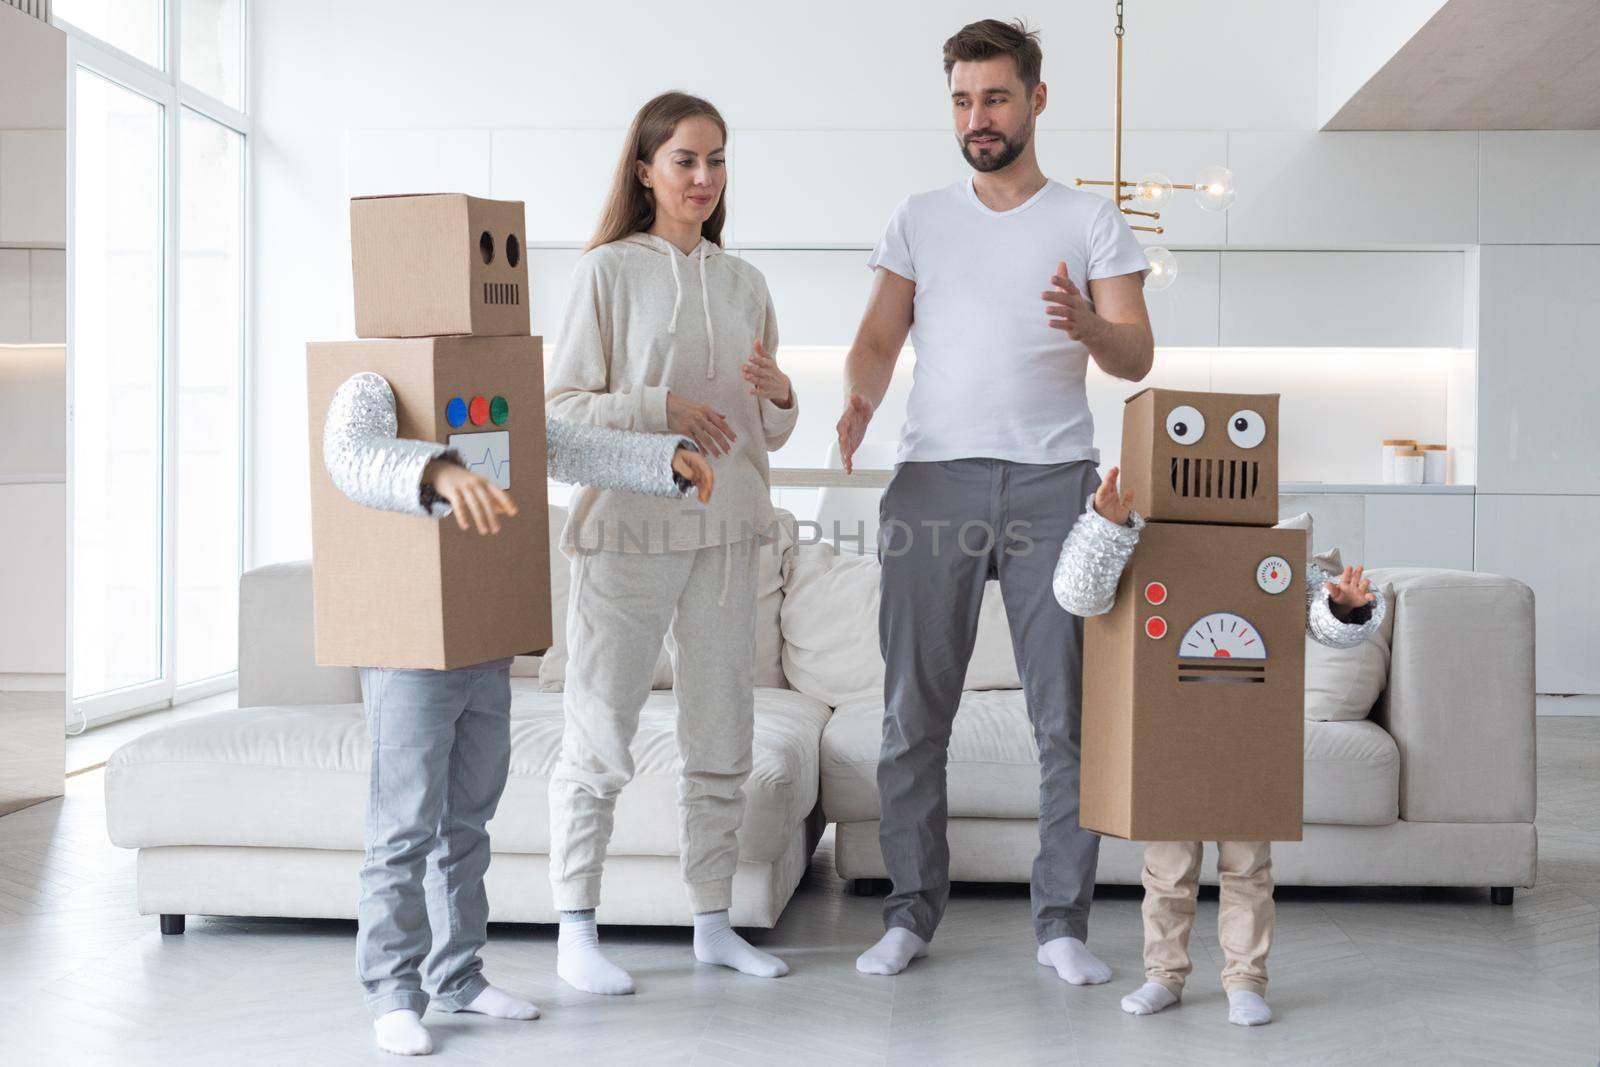 Happy family of parents and two children playing dancing like robots at home, children wearing handmade moving box costume of cardboard